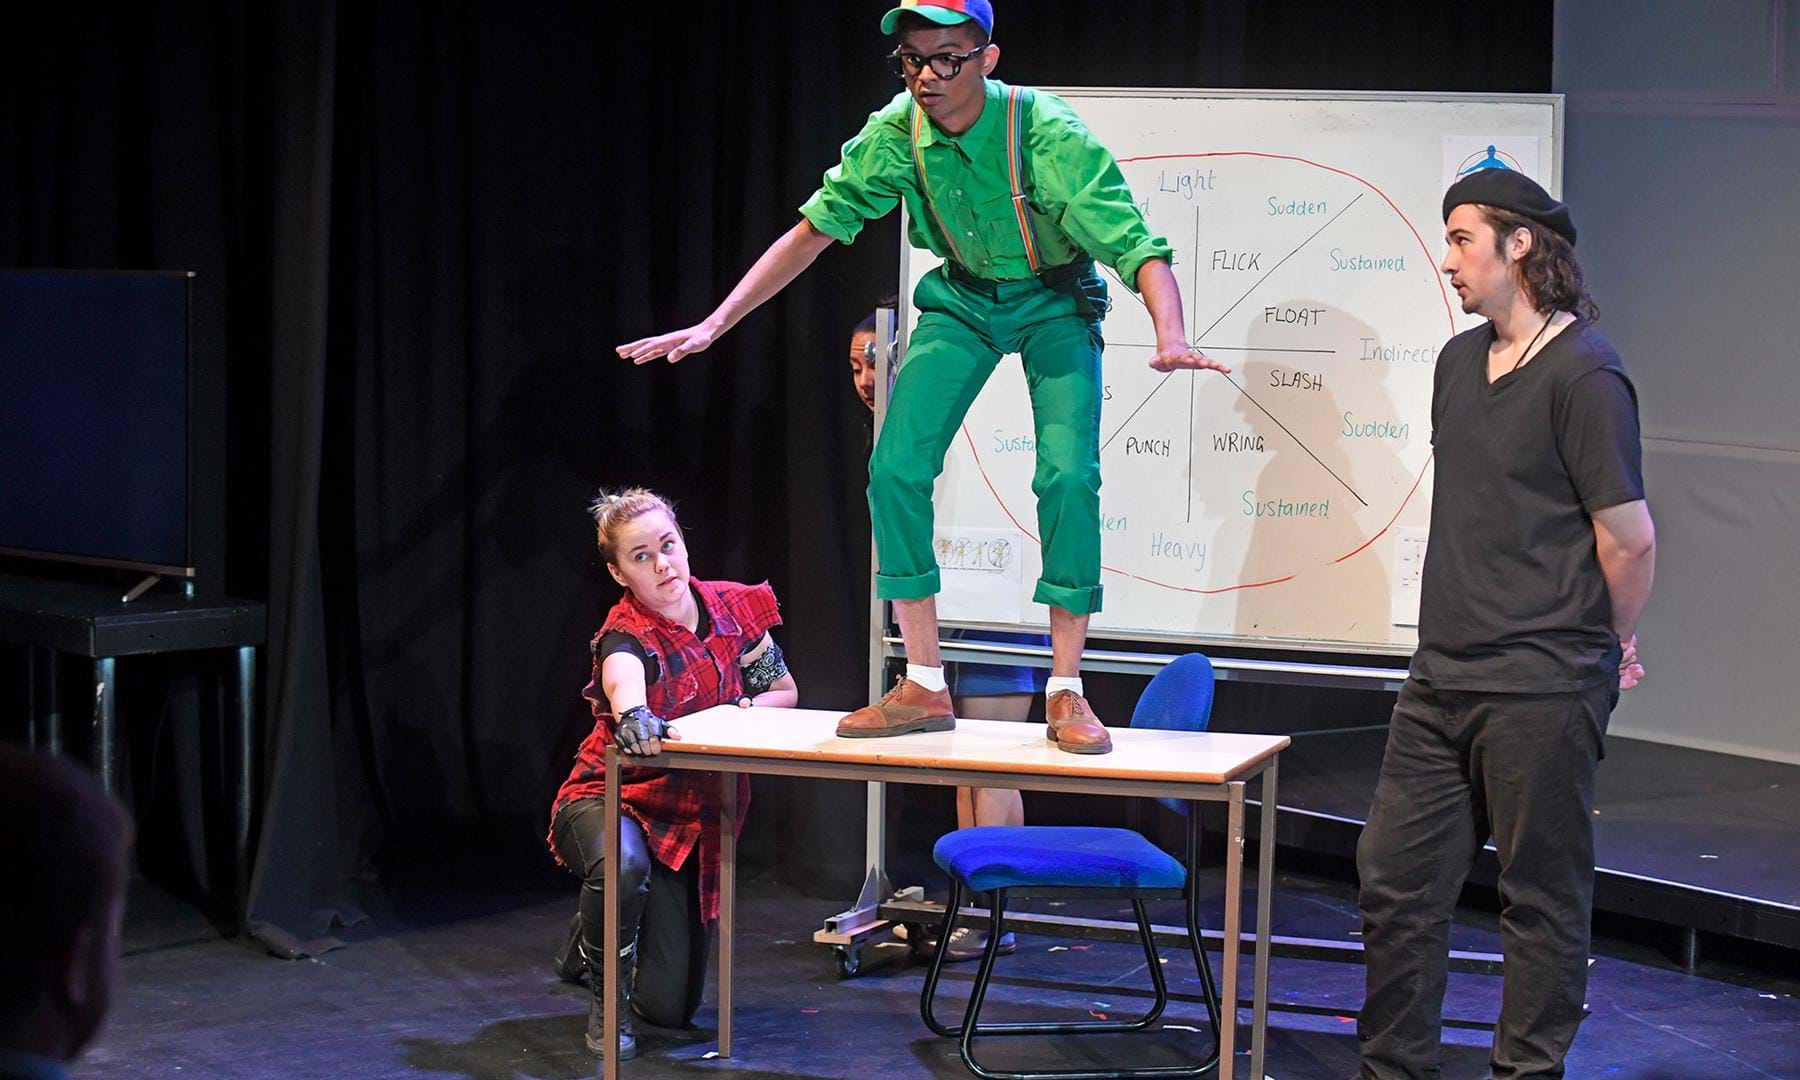 Stage Performance with actor dressed in green balancing on table